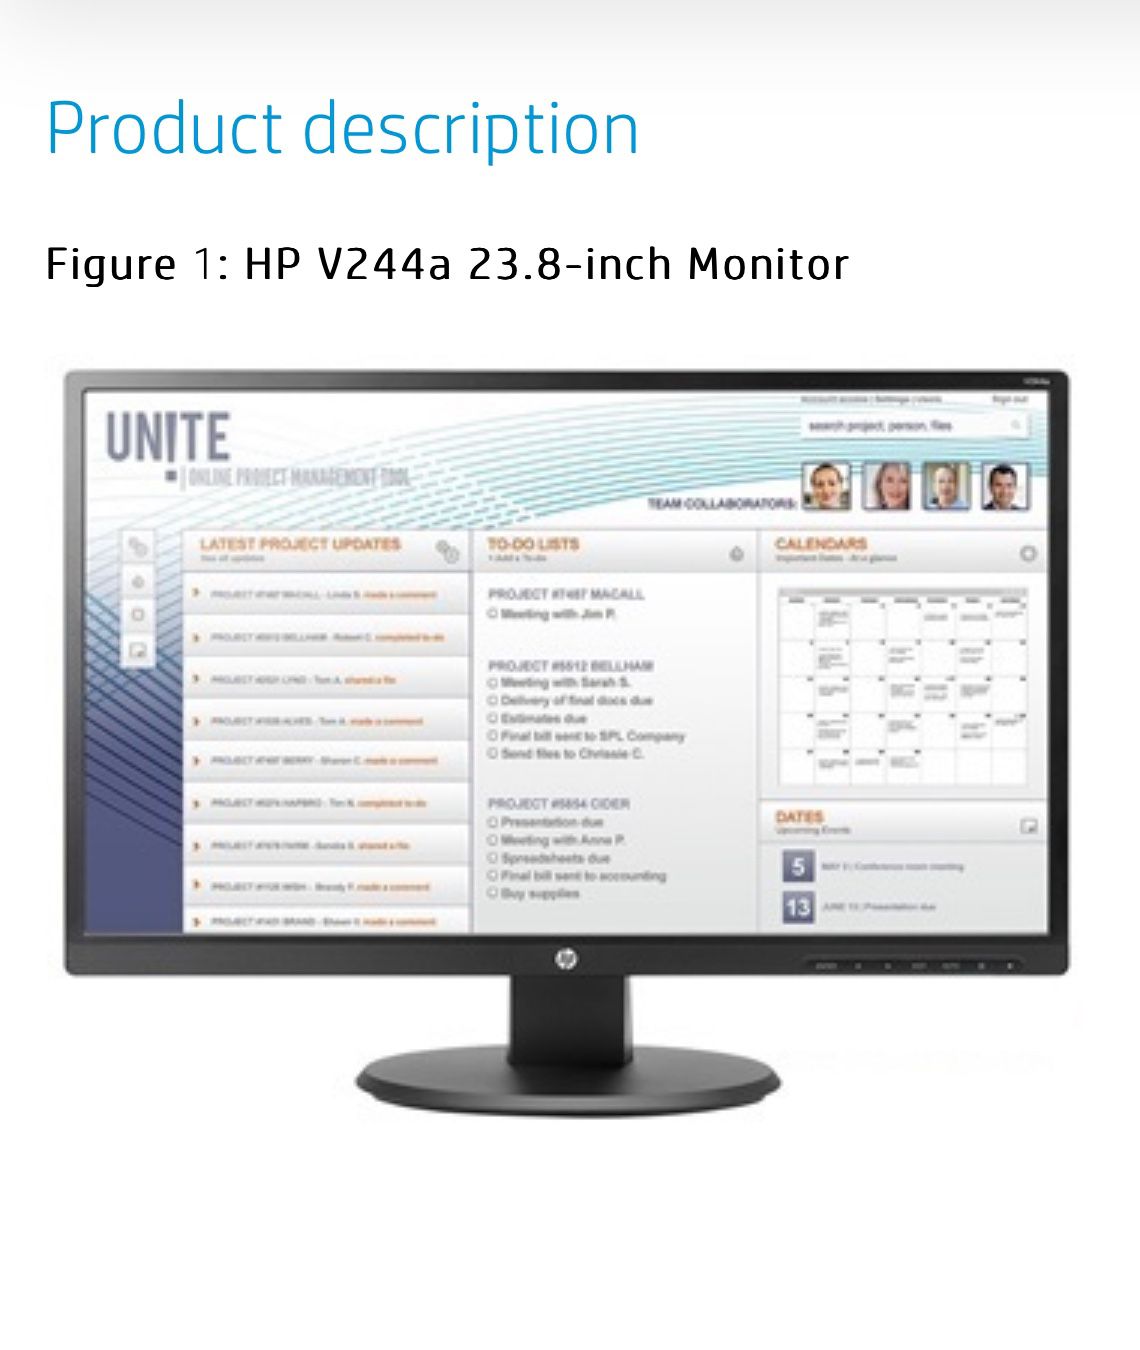 Two HP 244a Monitors